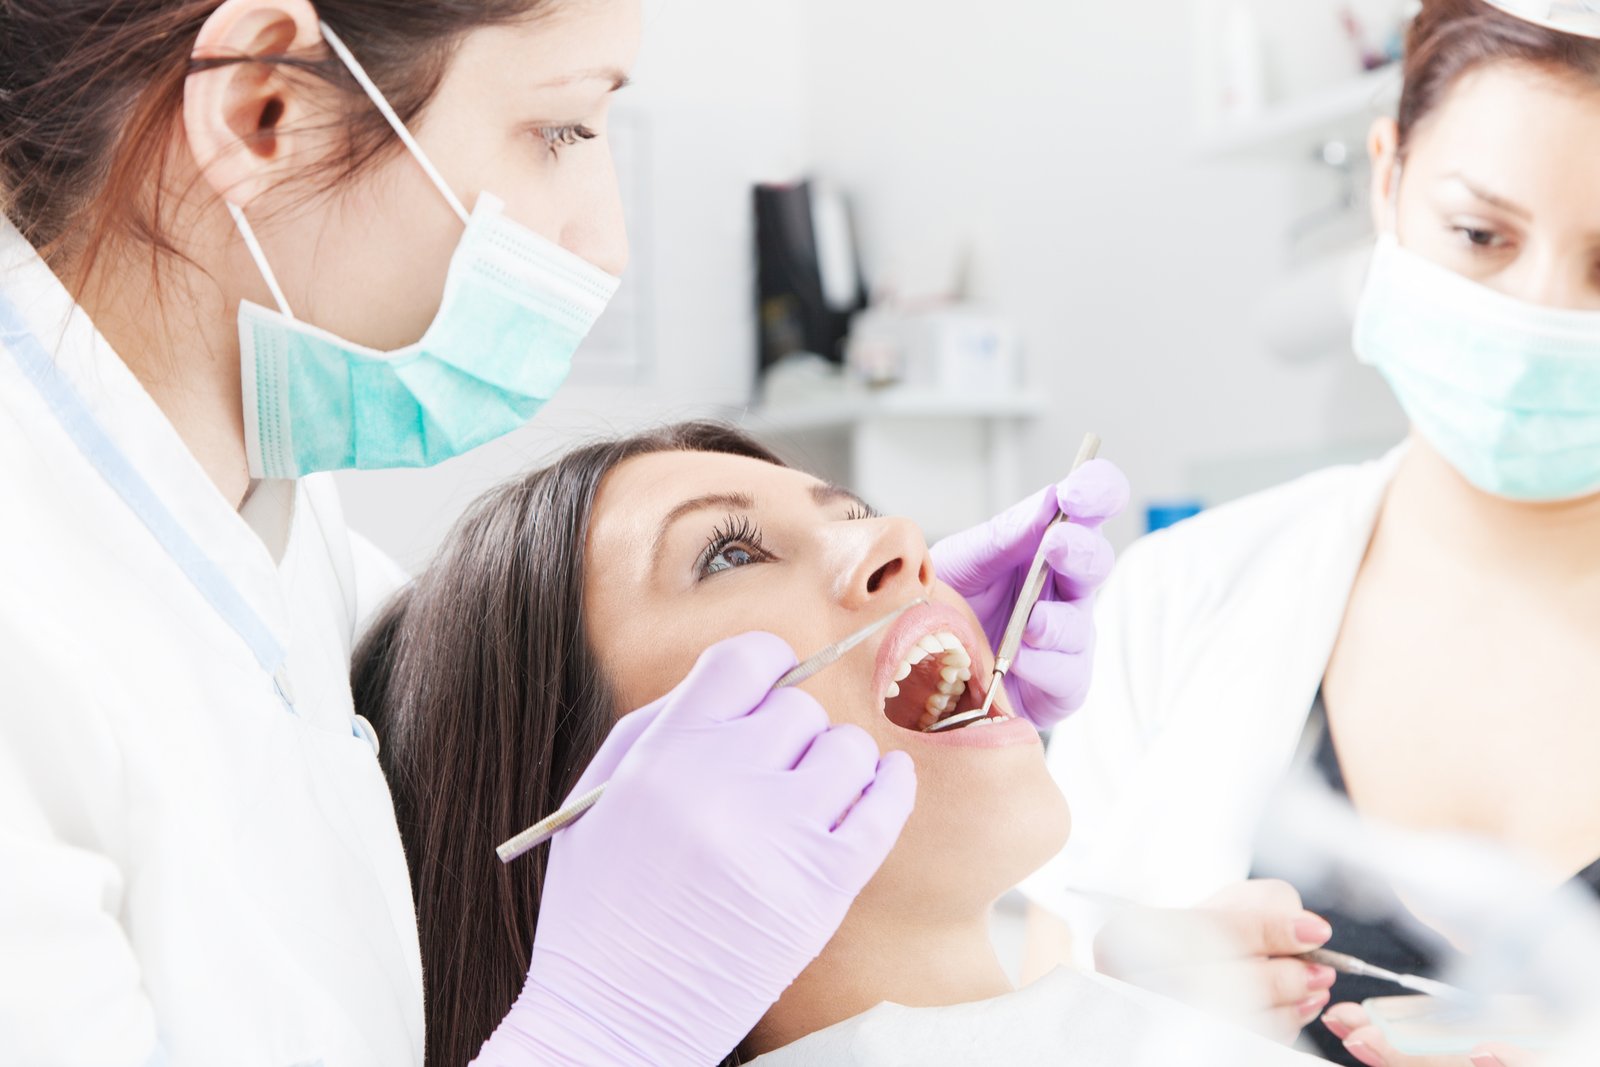 Let’s Talk About How To Increase Employee Retention Rates In The Dental Industry